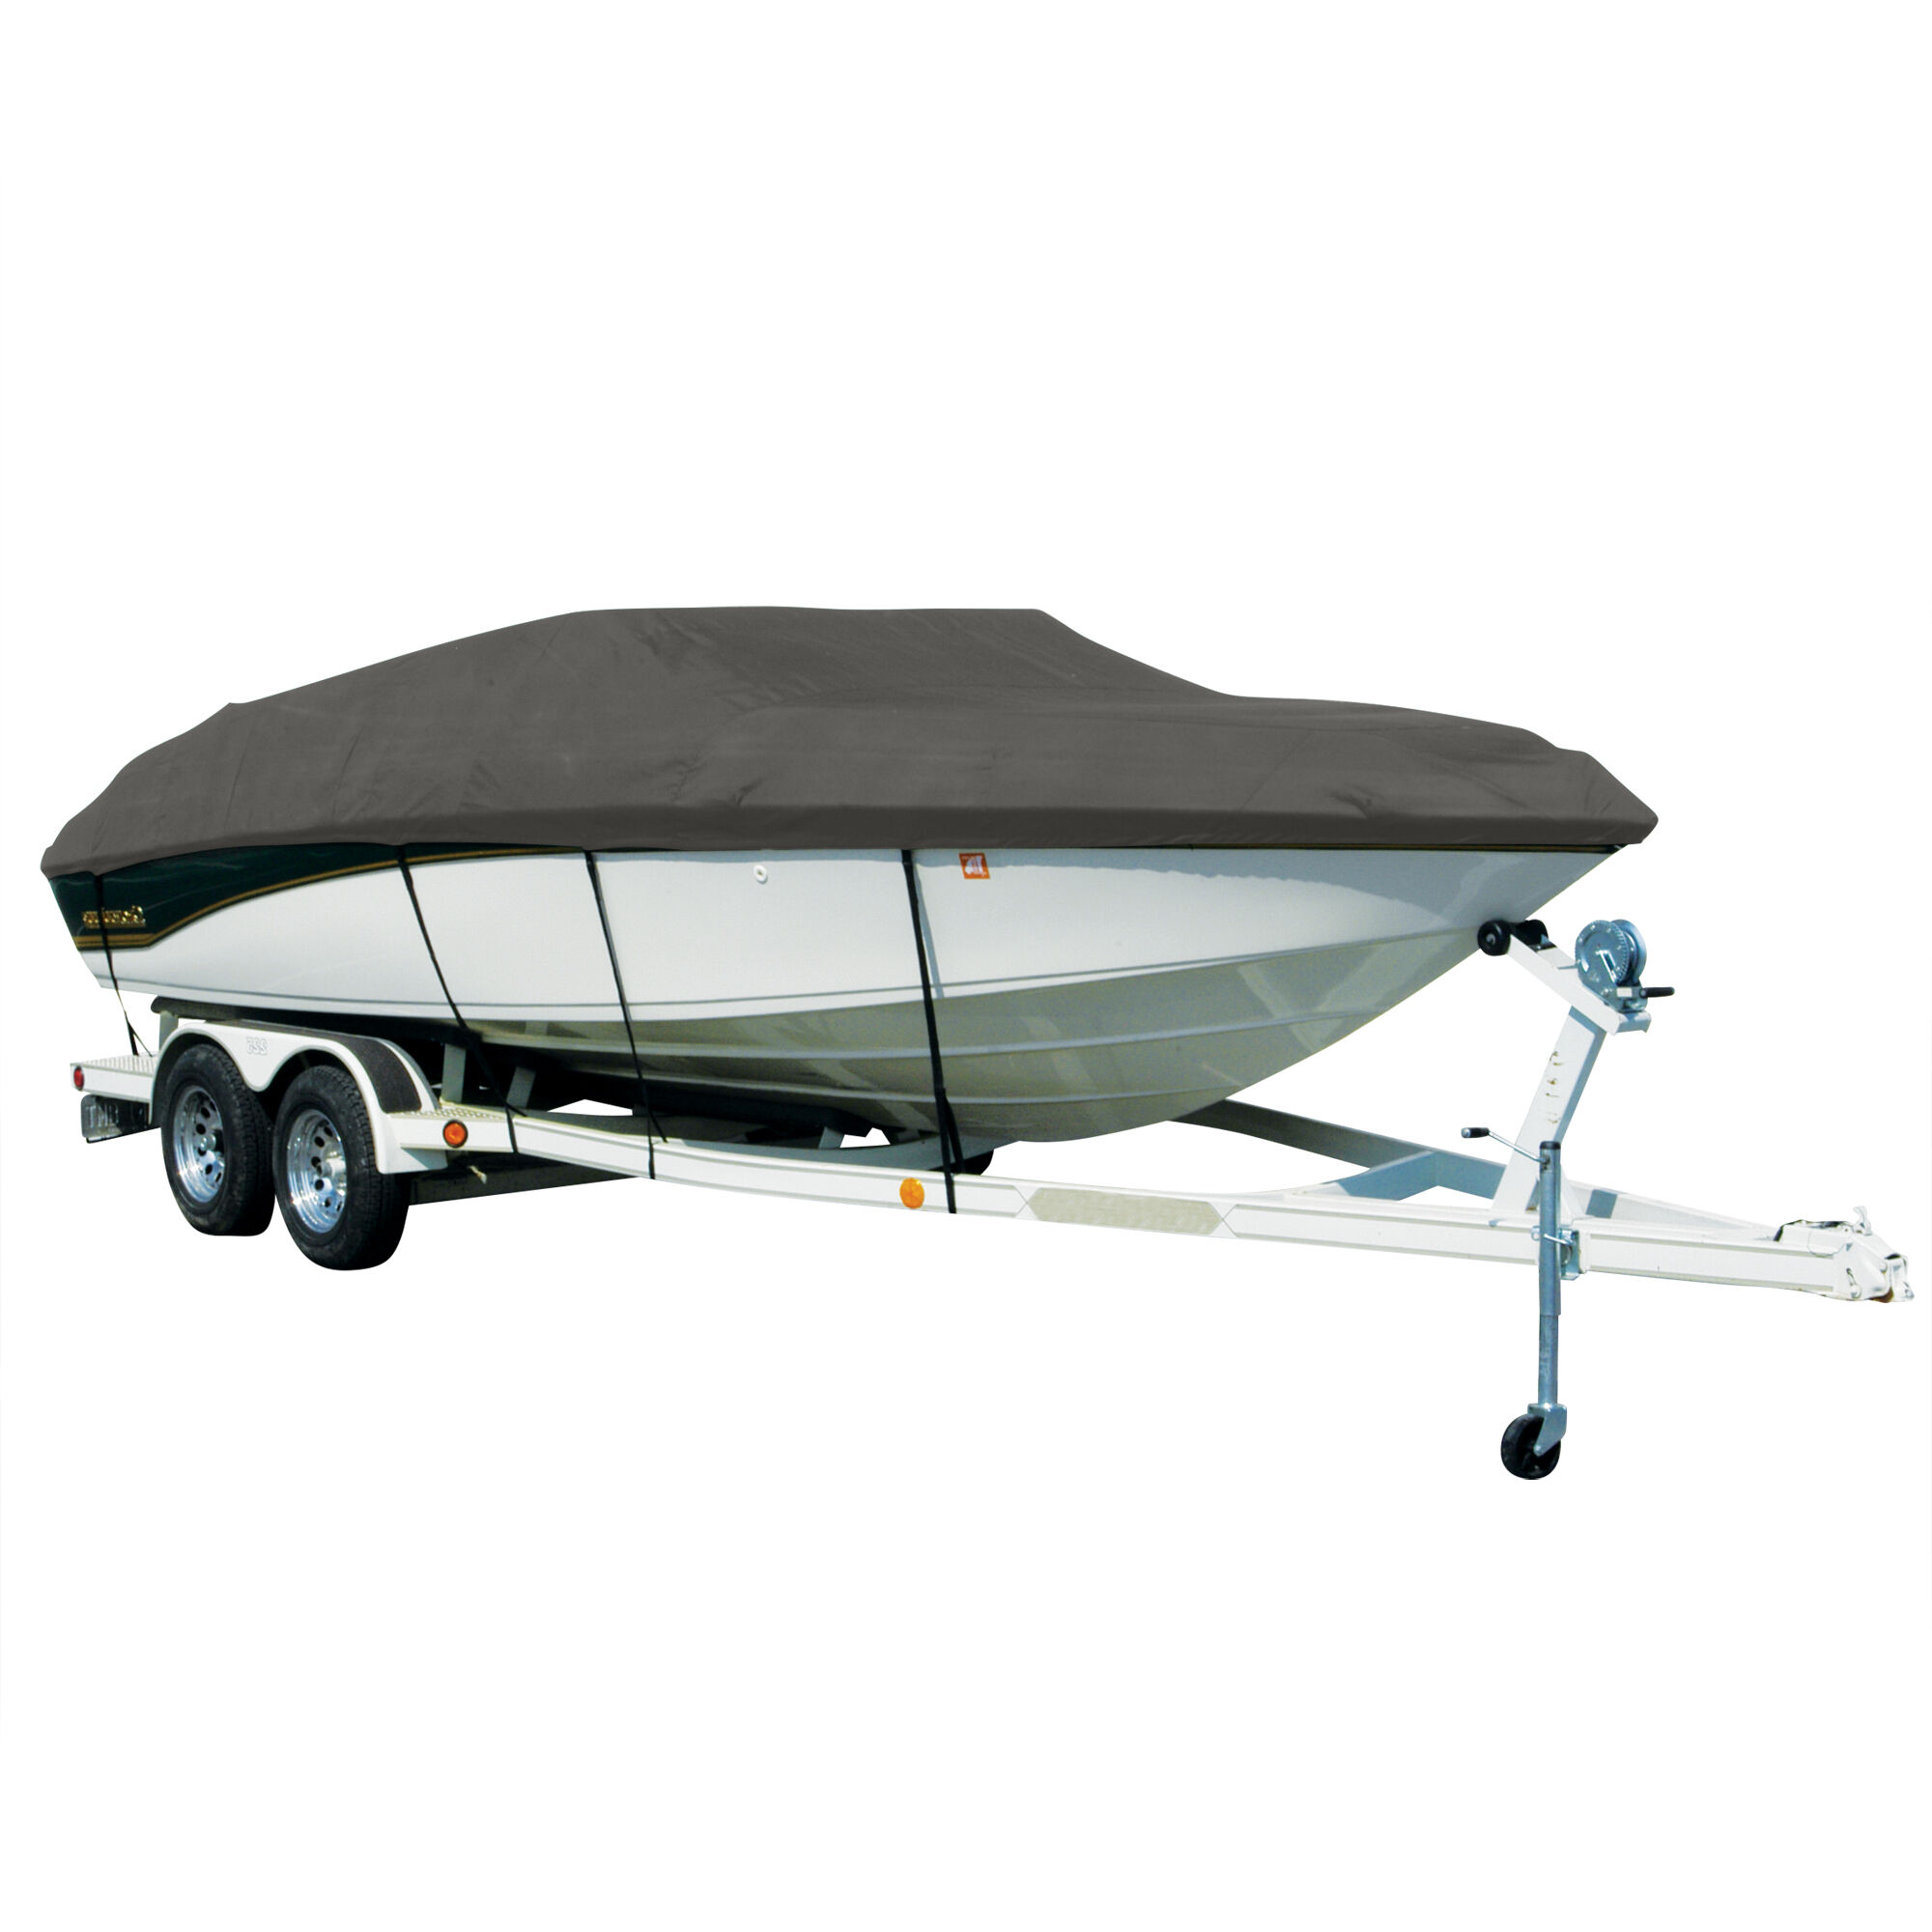 Covermate Exact Fit Sharkskin Boat Cover For Tracker Pro Guide V-175 Wt Bow Rider w/ Minnkota Port Trolling Motor I/O in Charcoal